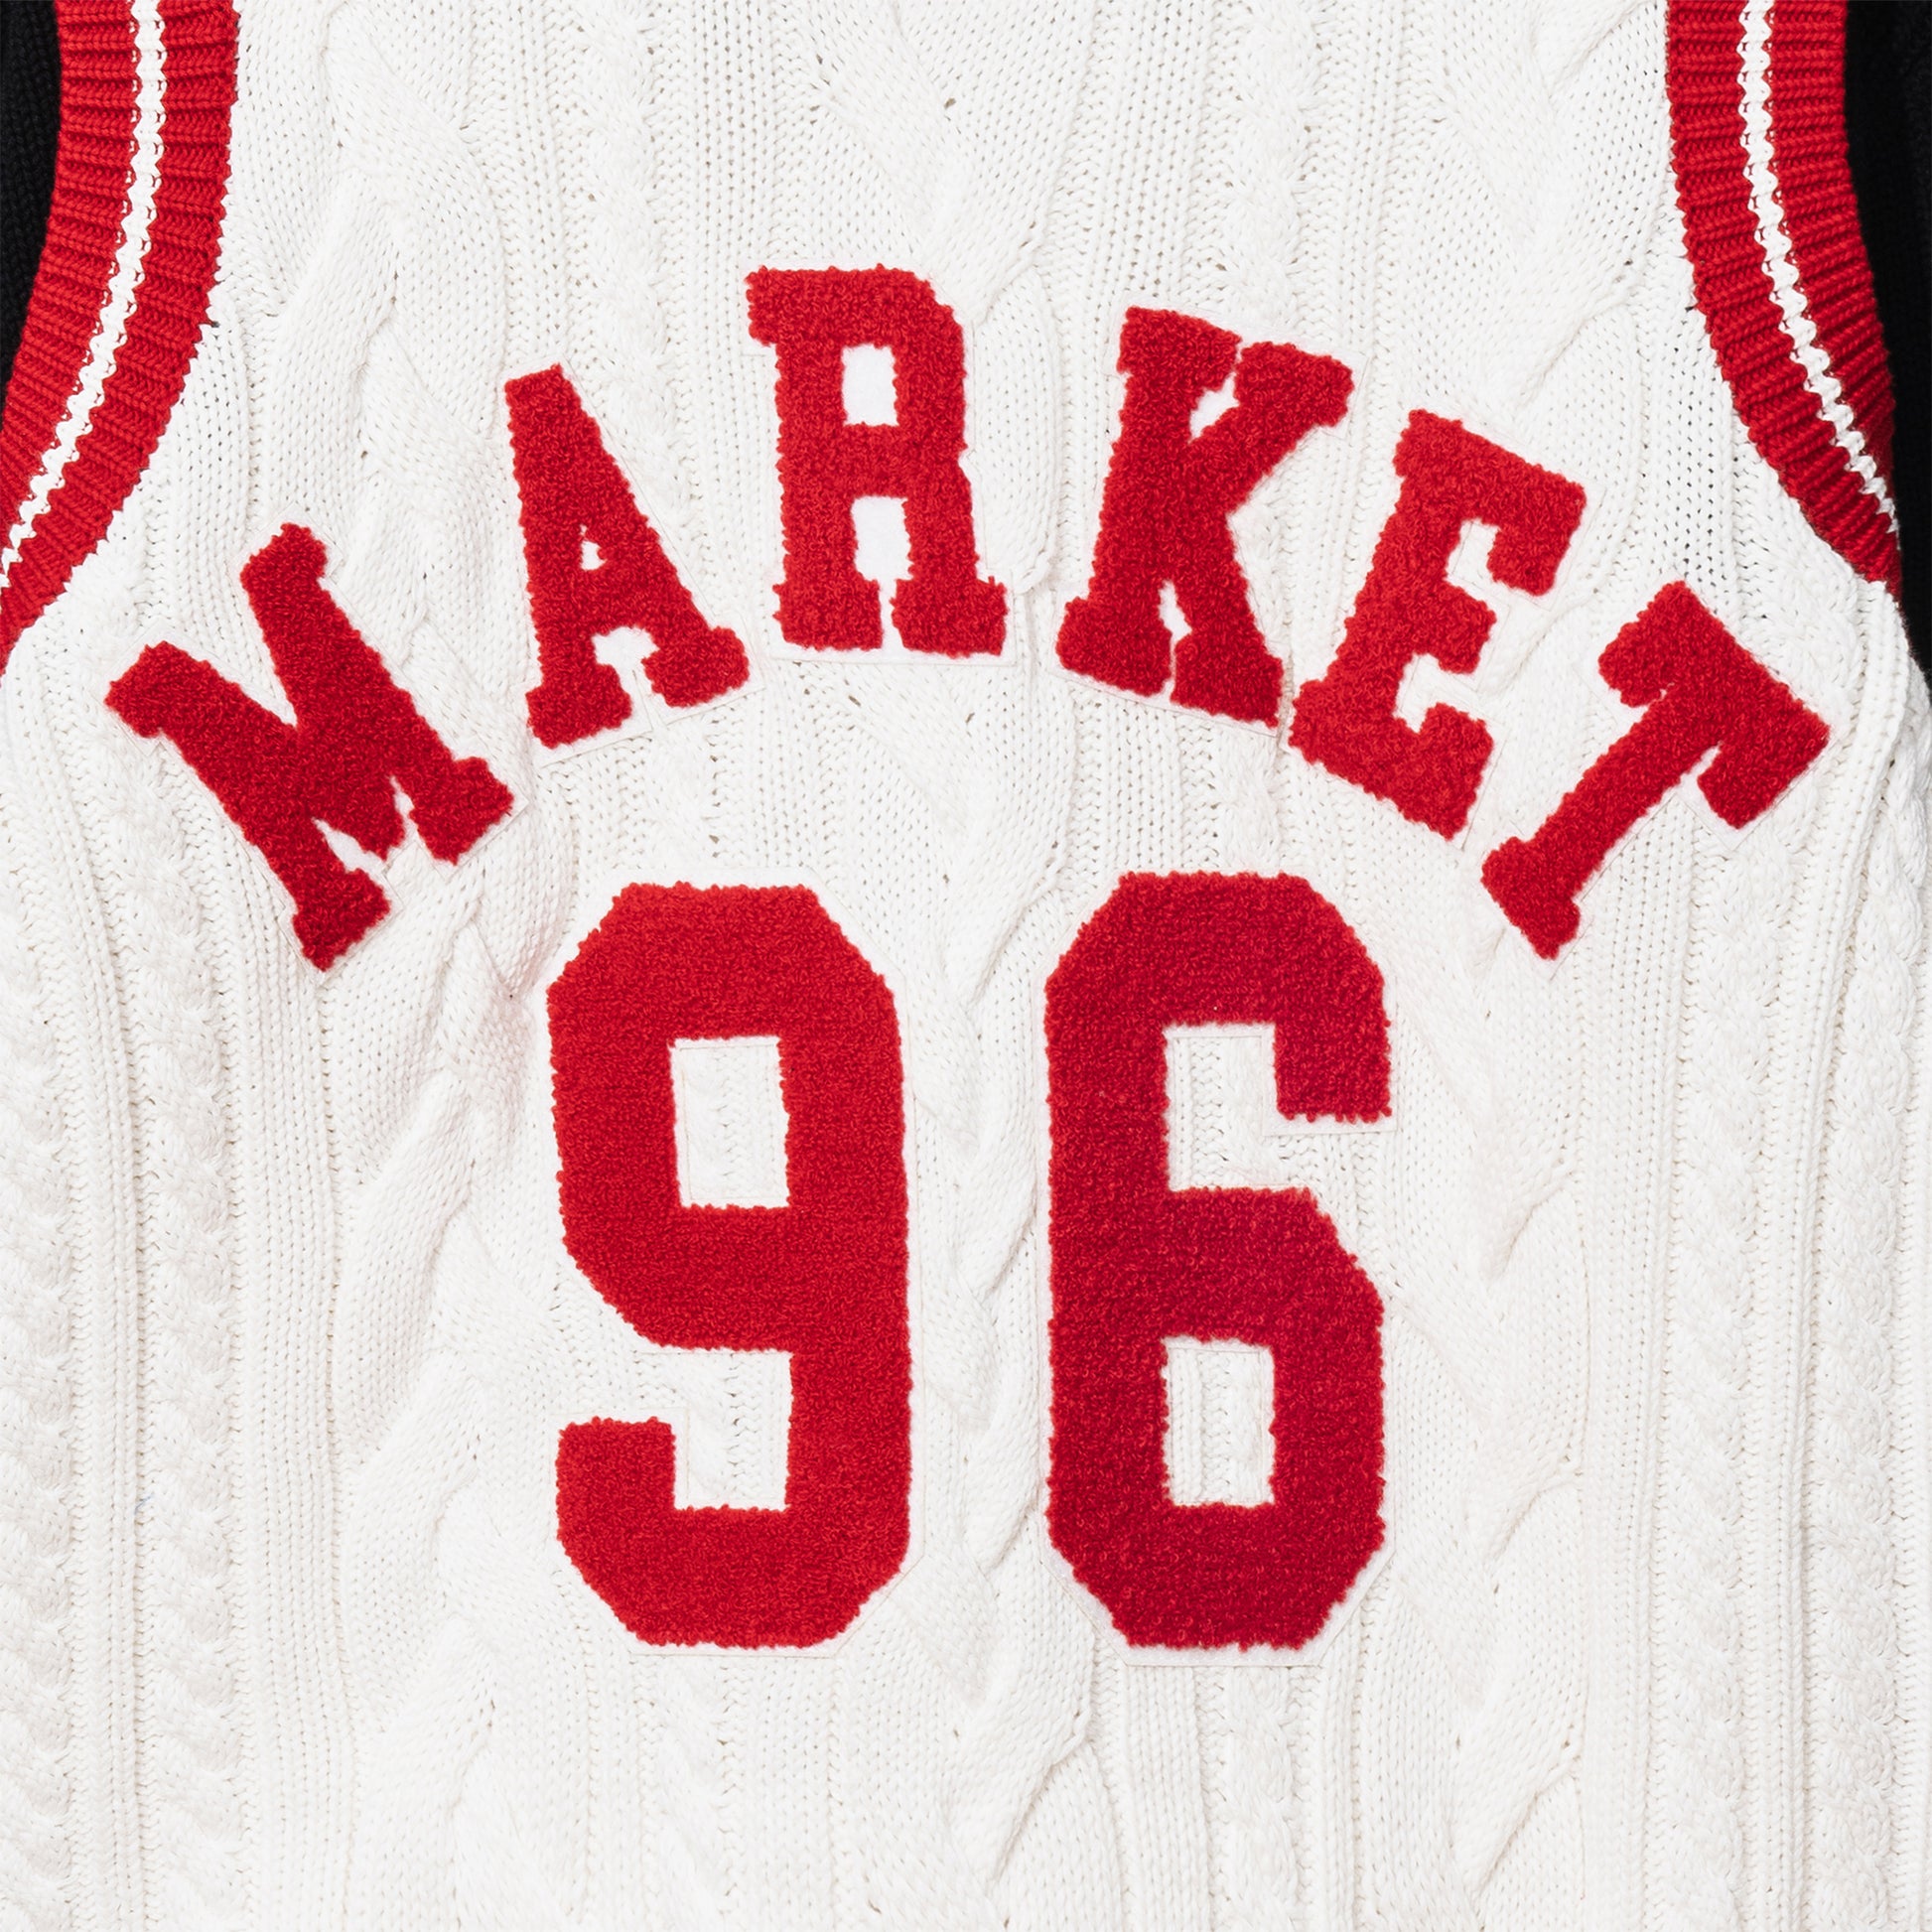 MARKET clothing brand HOME TEAM SWEATER. Find more graphic tees, jackets, cardigans and more at MarketStudios.com. Formally Chinatown Market.